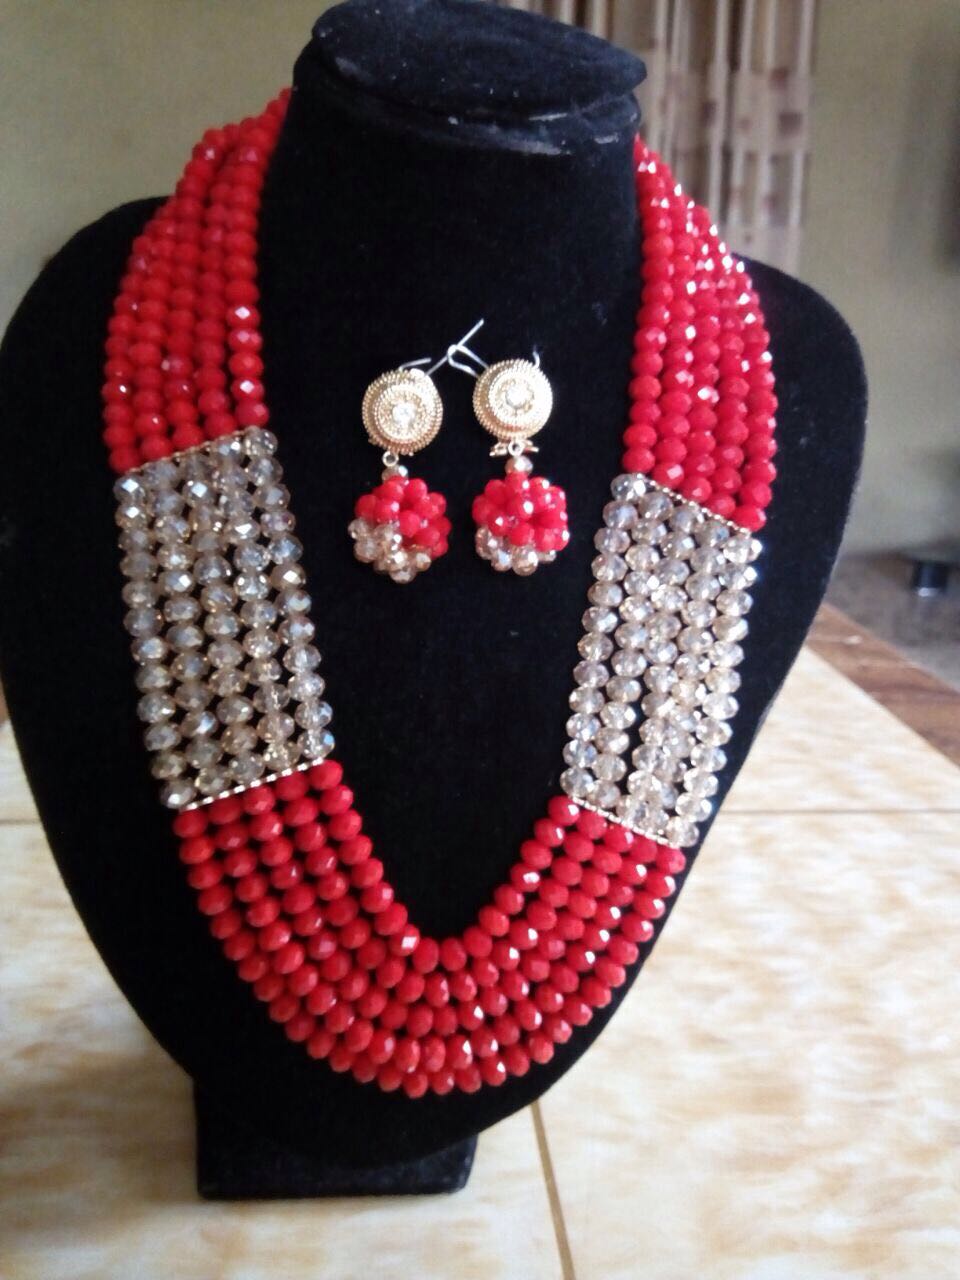 Gladys_collections: UK's glamorous beads and designs